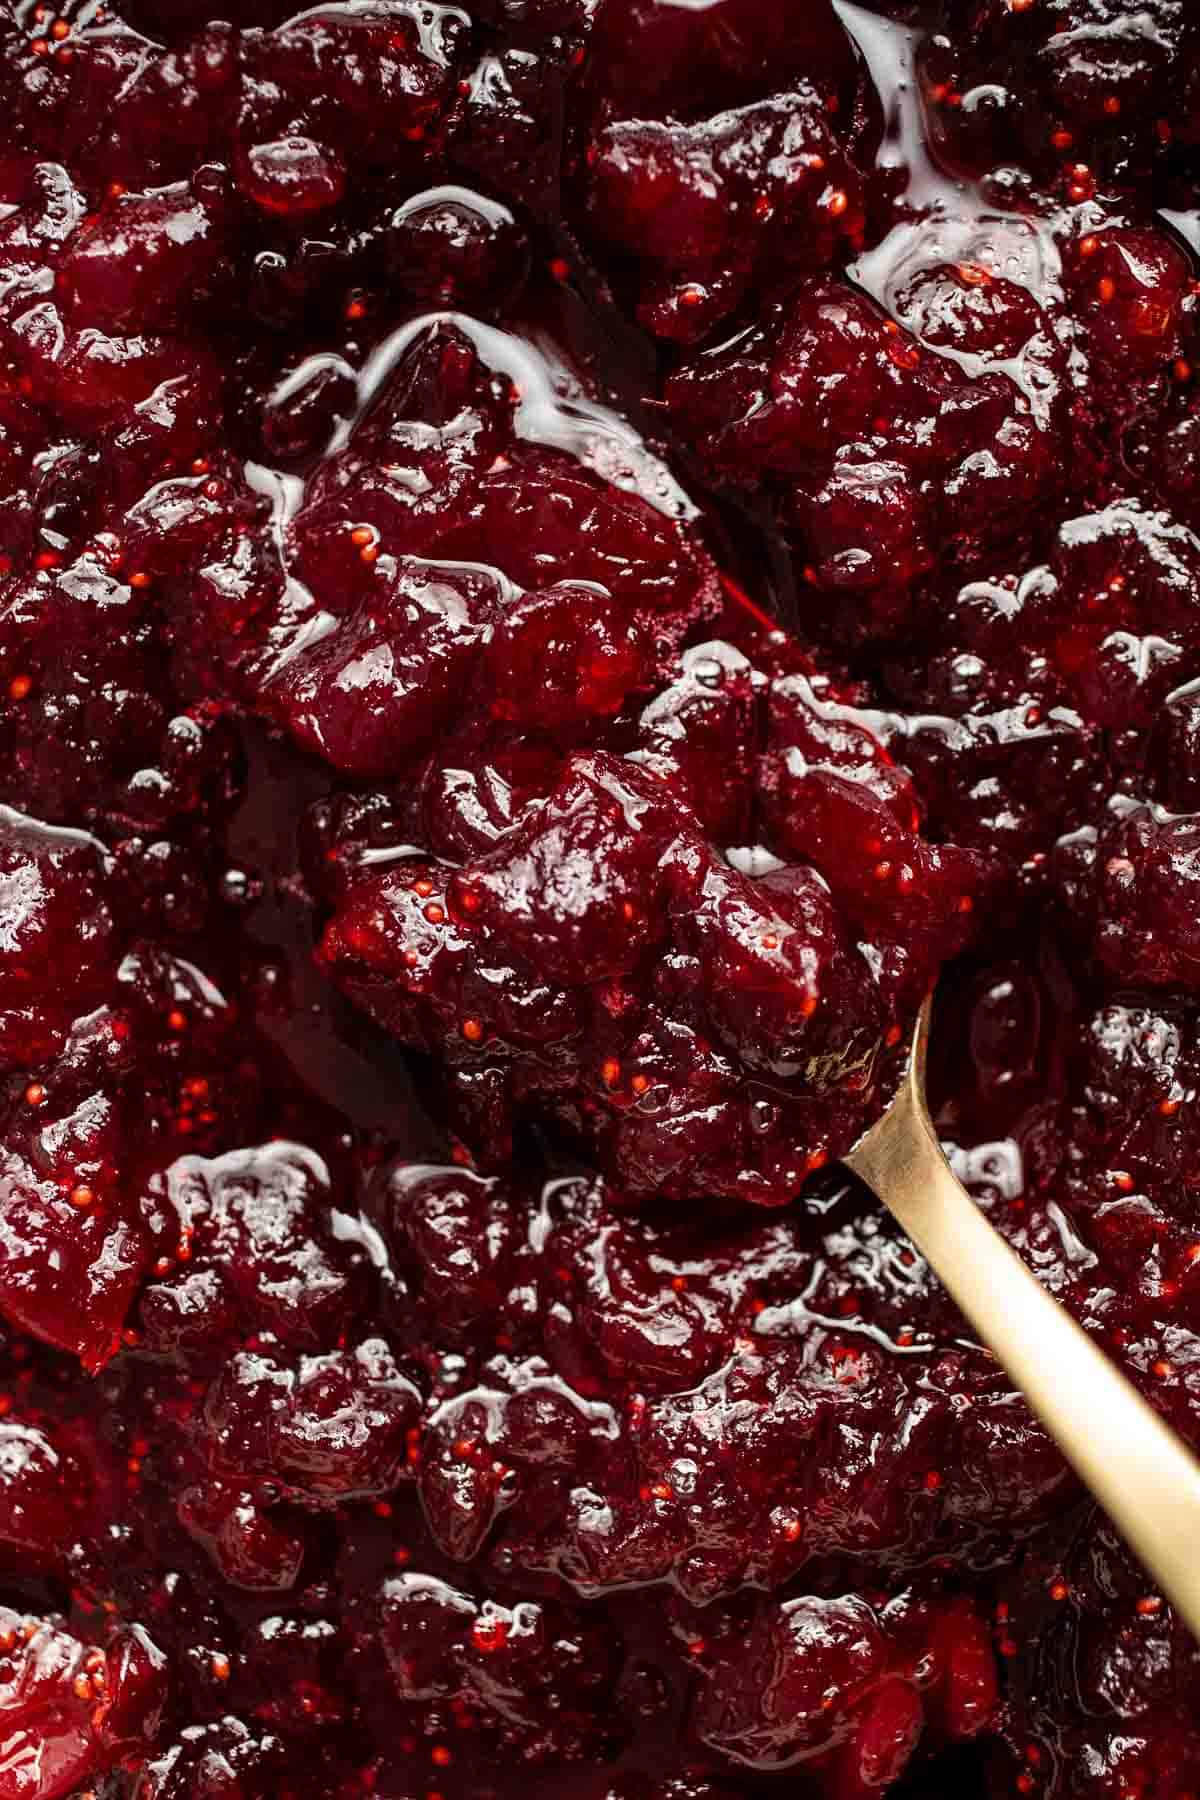 This Baked Cranberry Sauce recipe is an easy way to make a classic Thanksgiving side dish in the oven using 4 ingredients. It is thick, tart, and sweet. | aheadofthyme.com